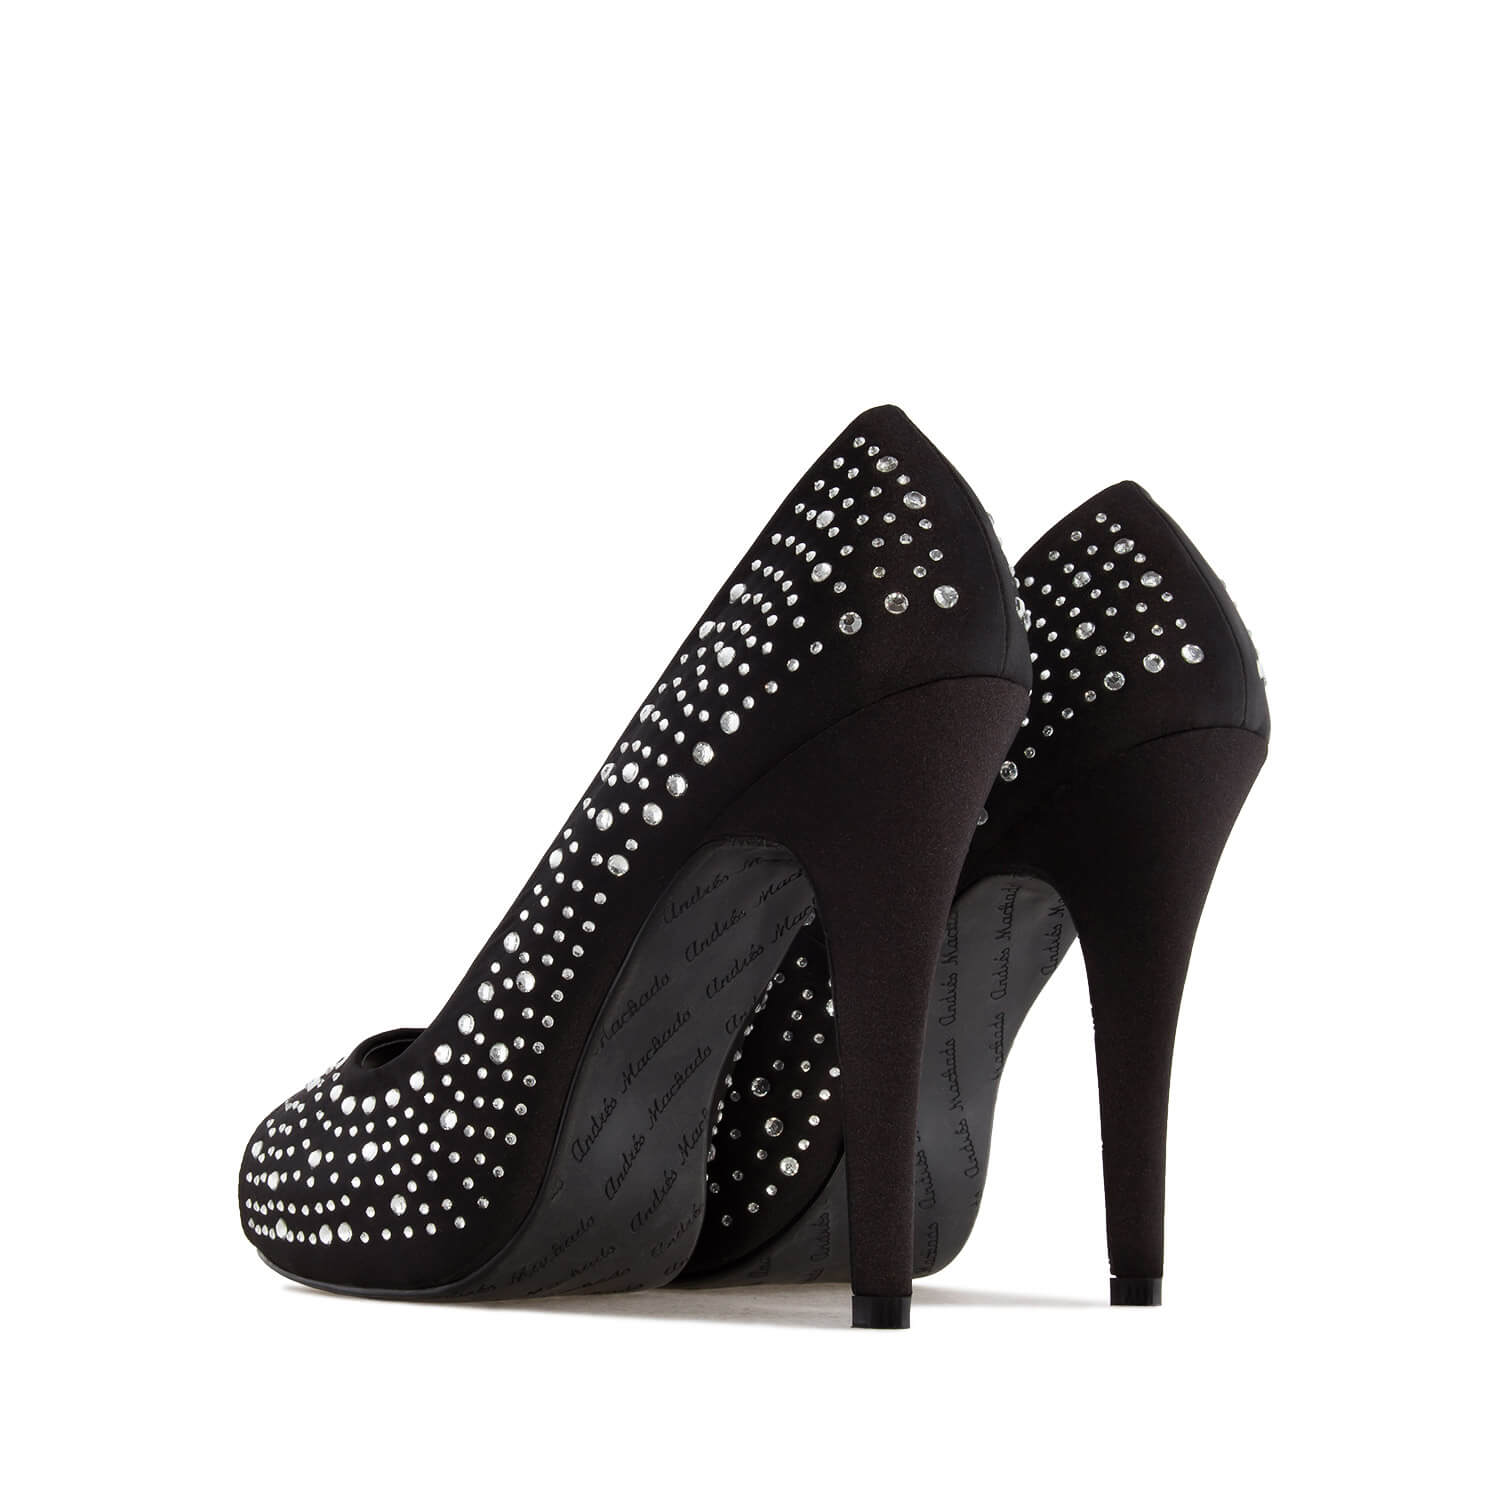 Sophisticated Peep Toe Pumps in Black Satin with Strass - Women, Large ...